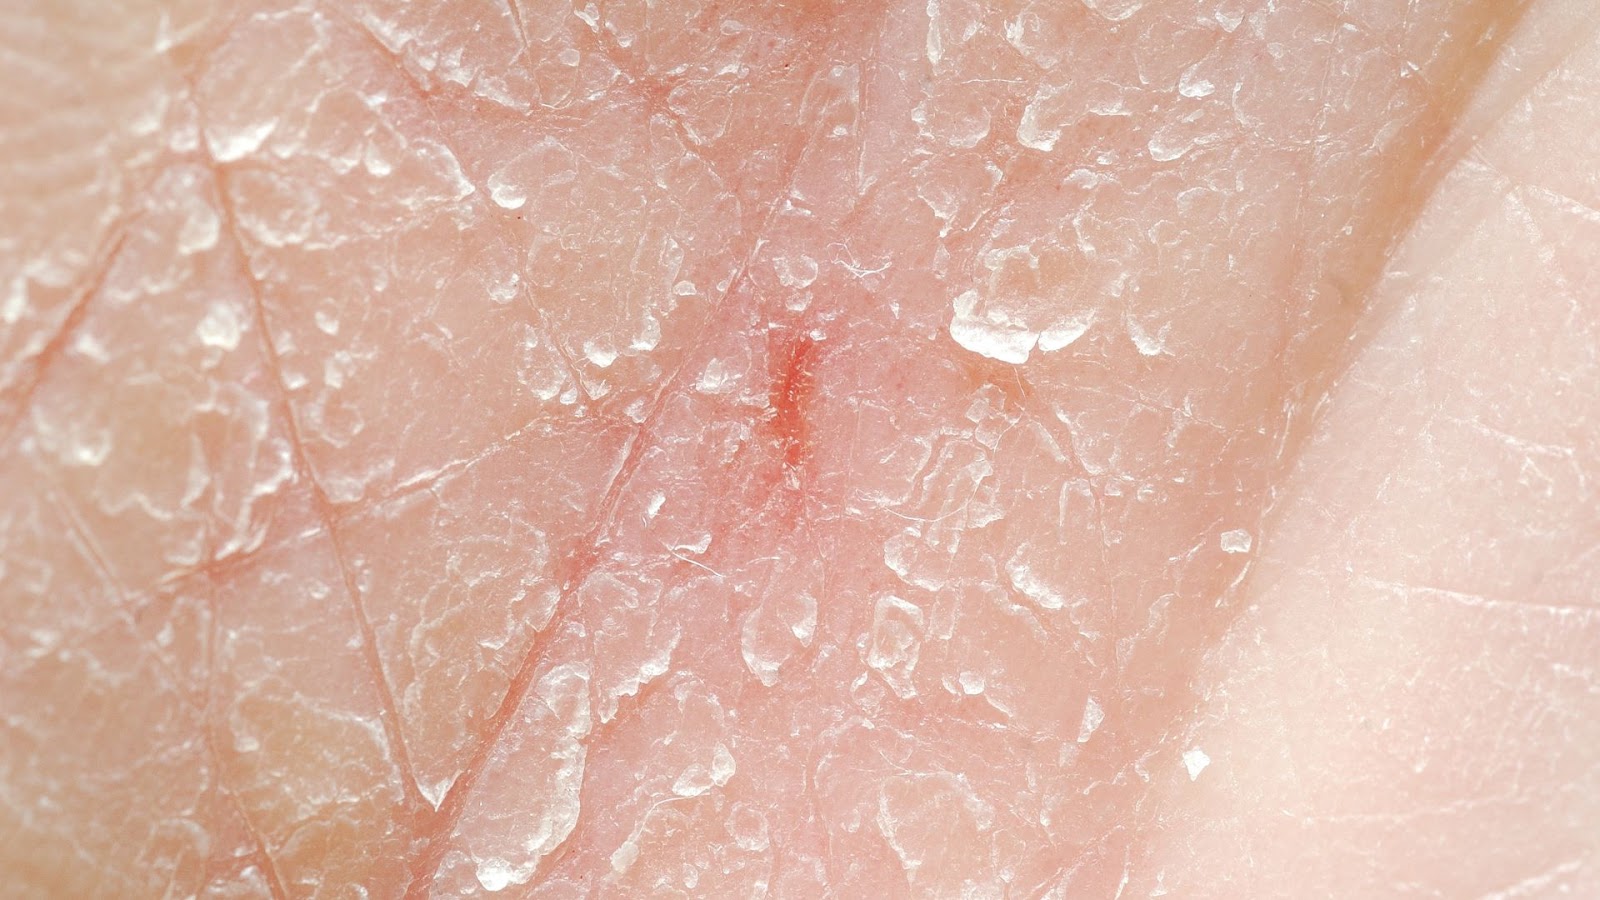 A patch of very dry skin.